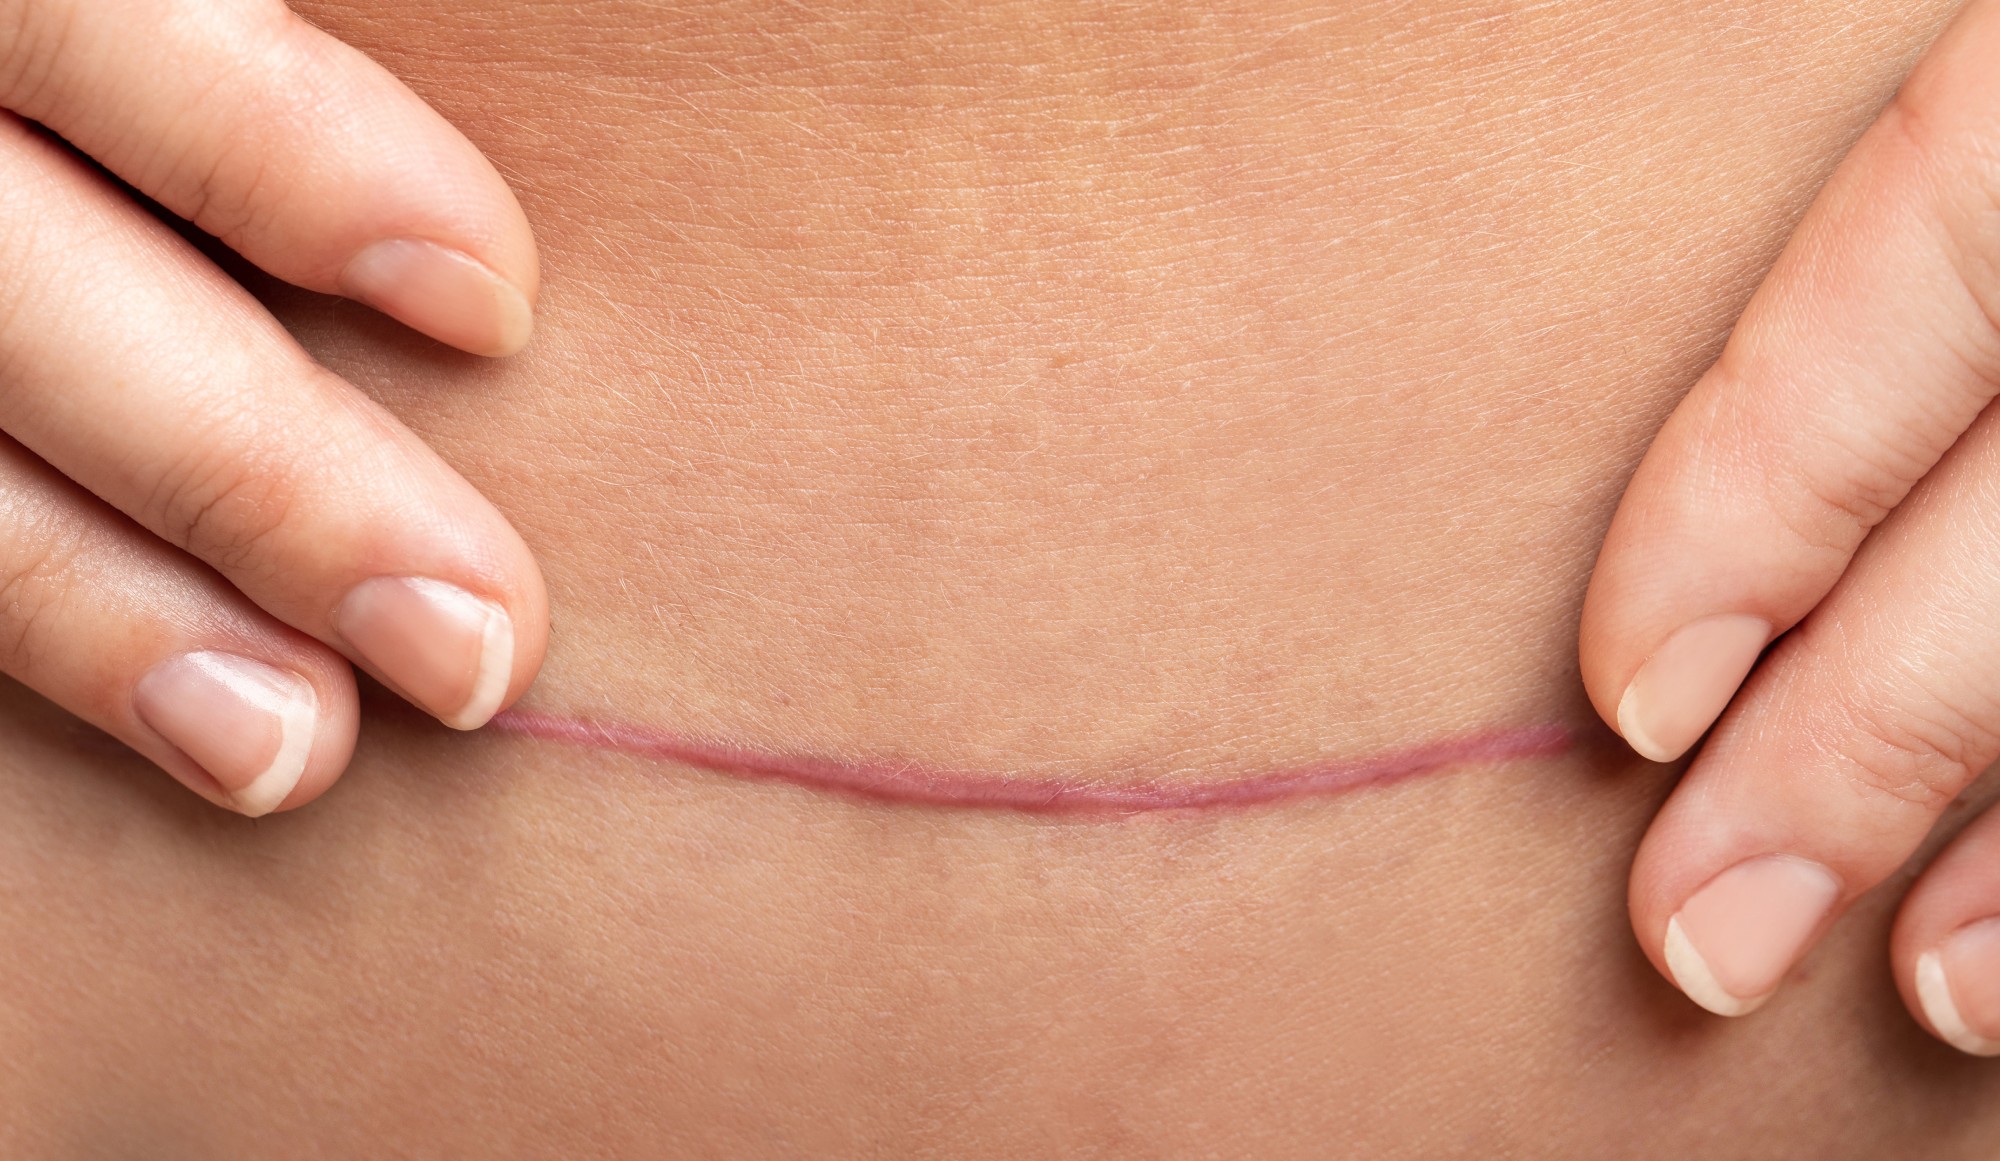 Hypertrophic Vs Keloid Scars: What You Need To Know